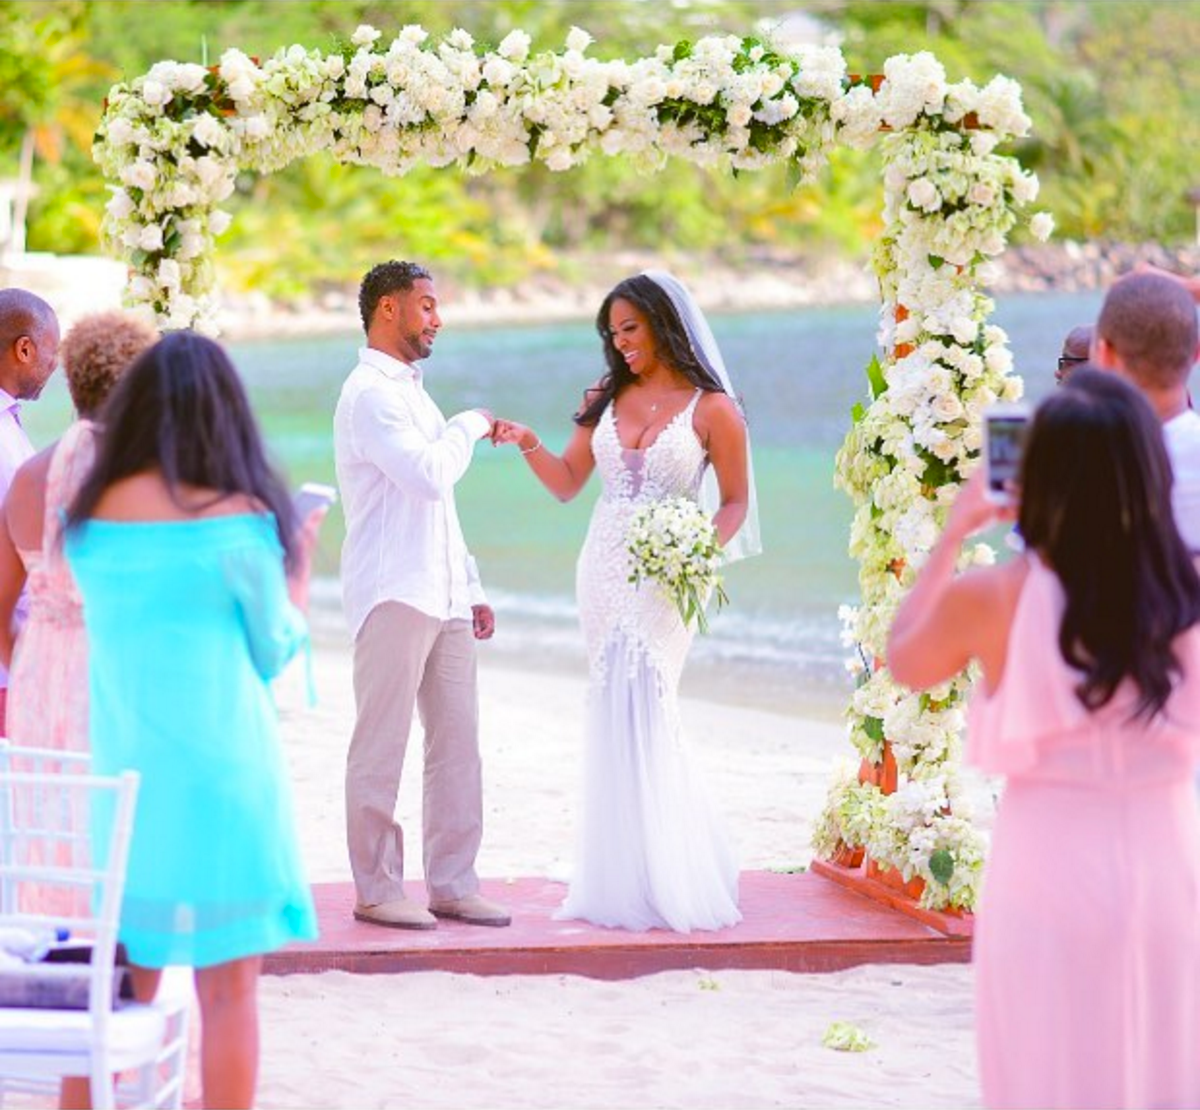 Kenya Moore's Wedding Details! The RHOA Star On Her Dress, Her Vows And The St. Lucia Celebration
